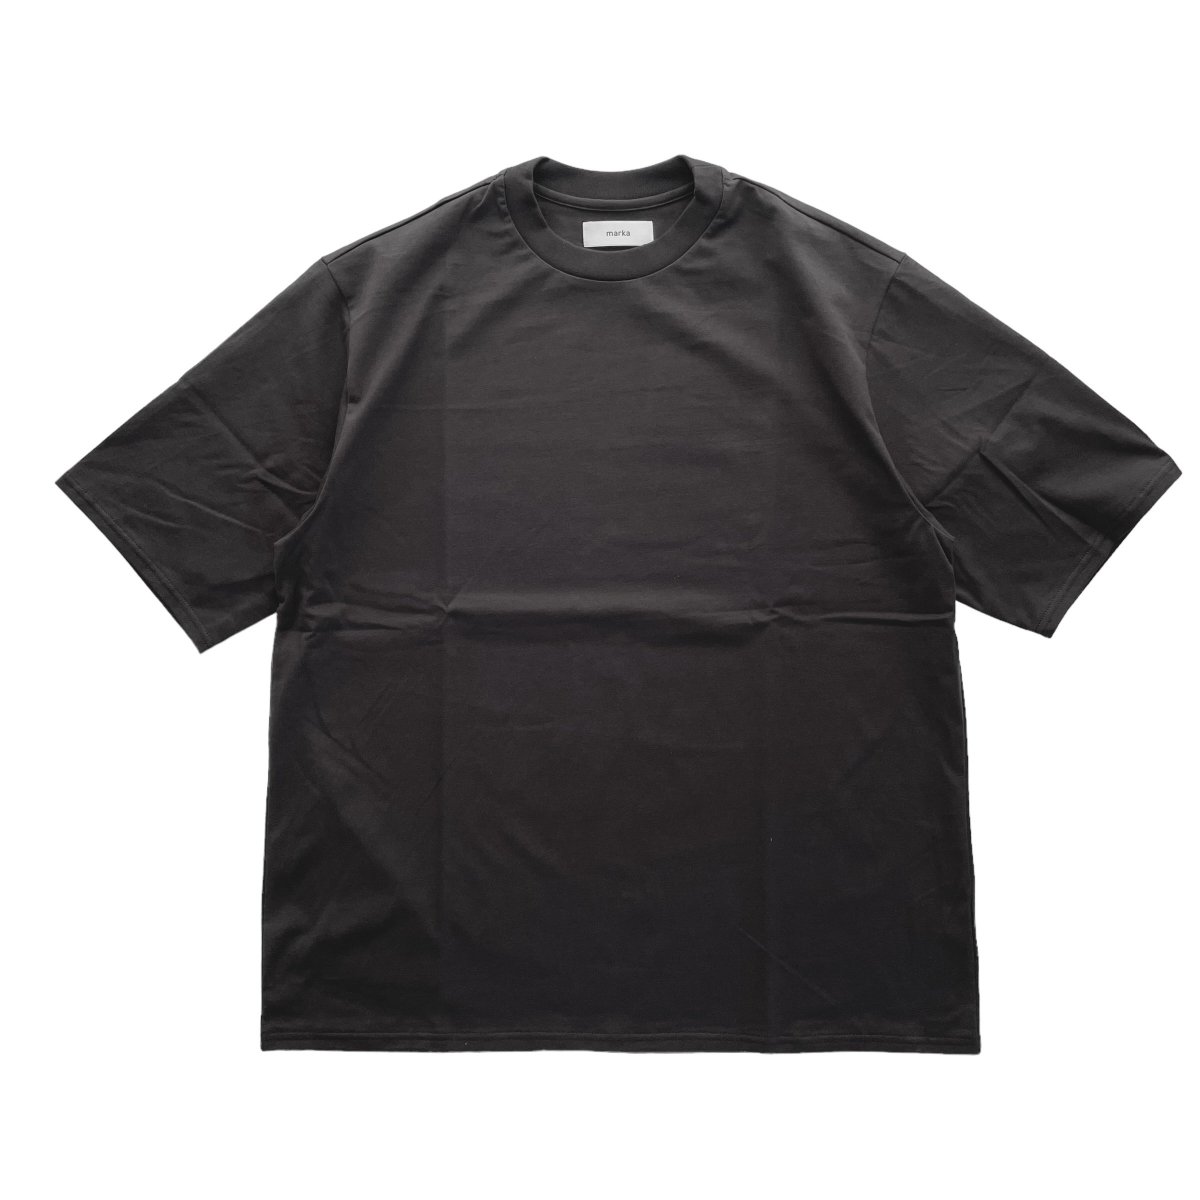 marka <BR>CREW NECK TEE S/S (CHARCOAL)